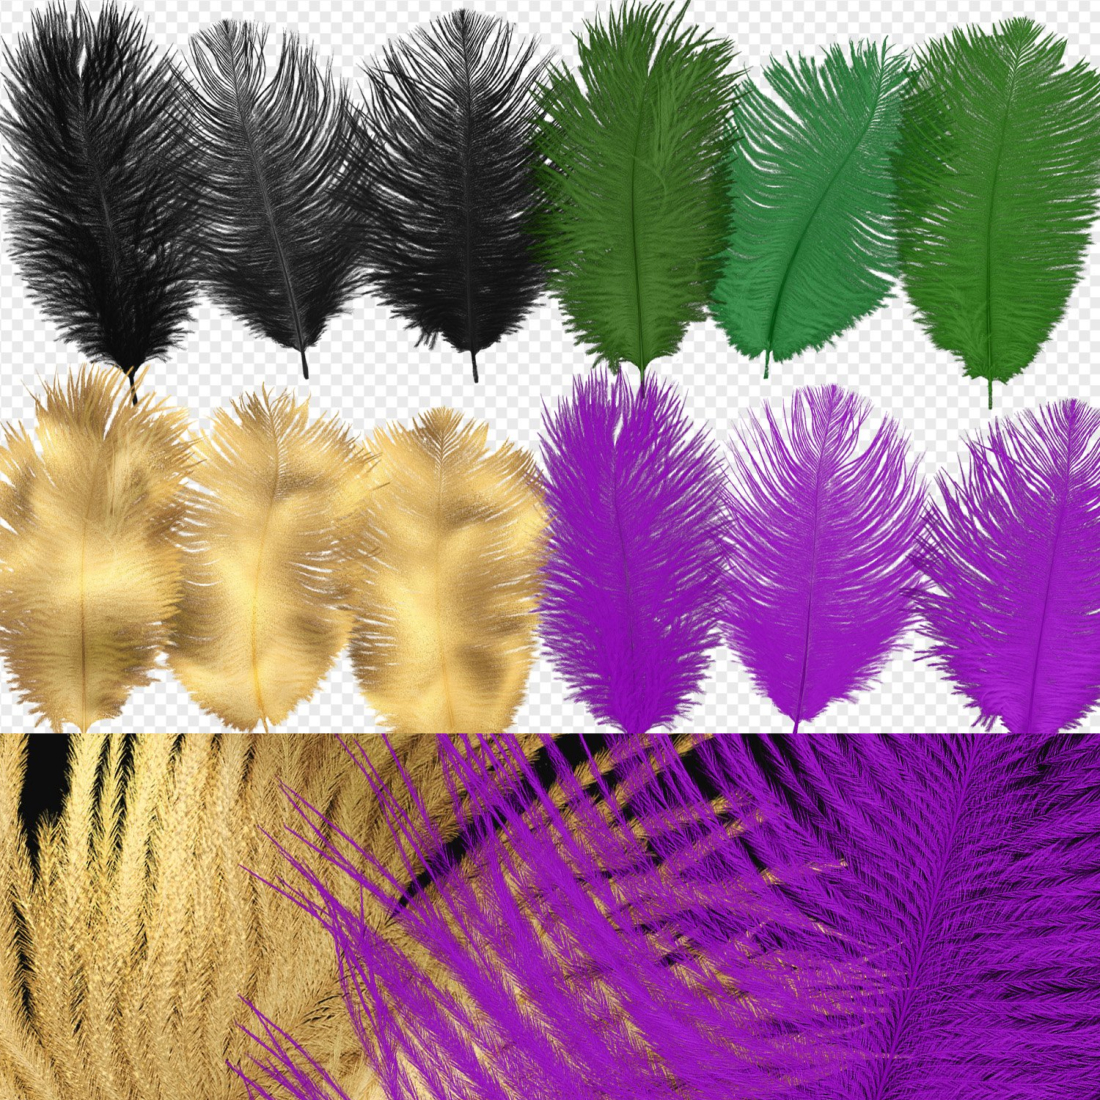 Images with mardi gras ostrich feathers.